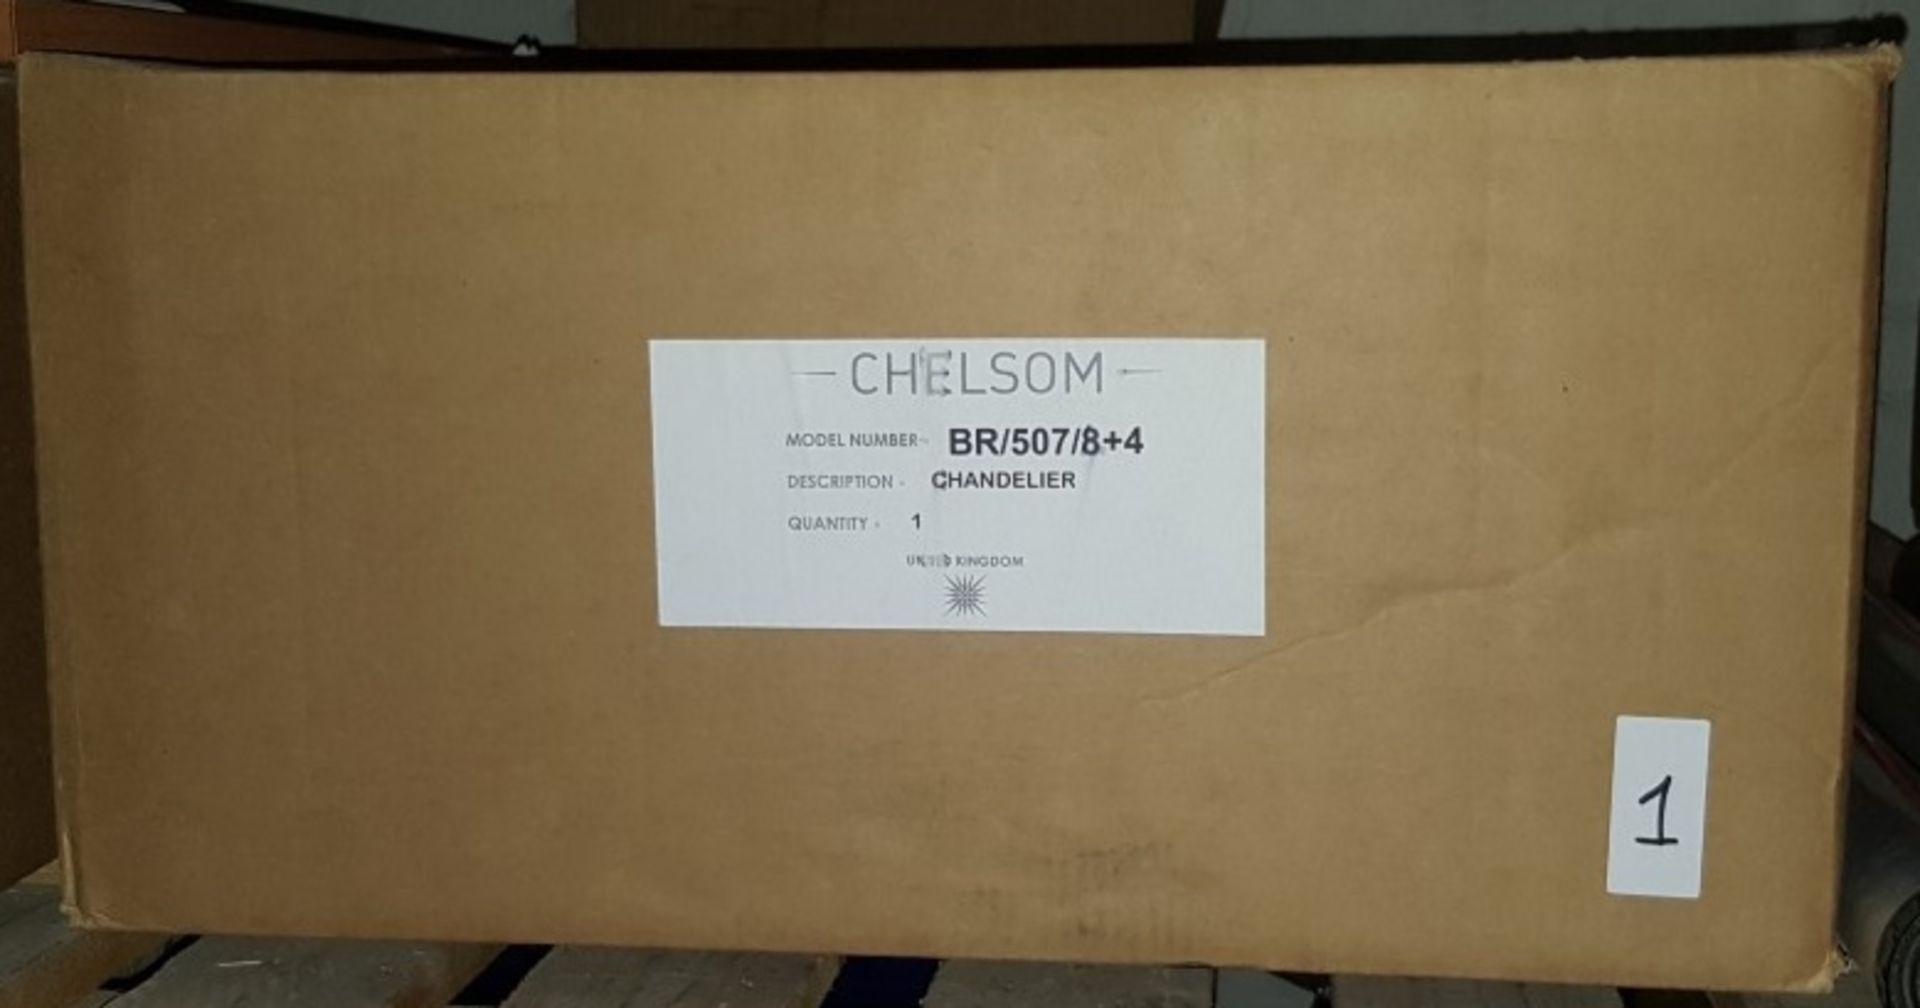 1 x New In Box Chelsom Ballroom Сhandelier BR/507/8+4 - CL001 - REF288/A31 - Location: Altrincham - Image 3 of 3